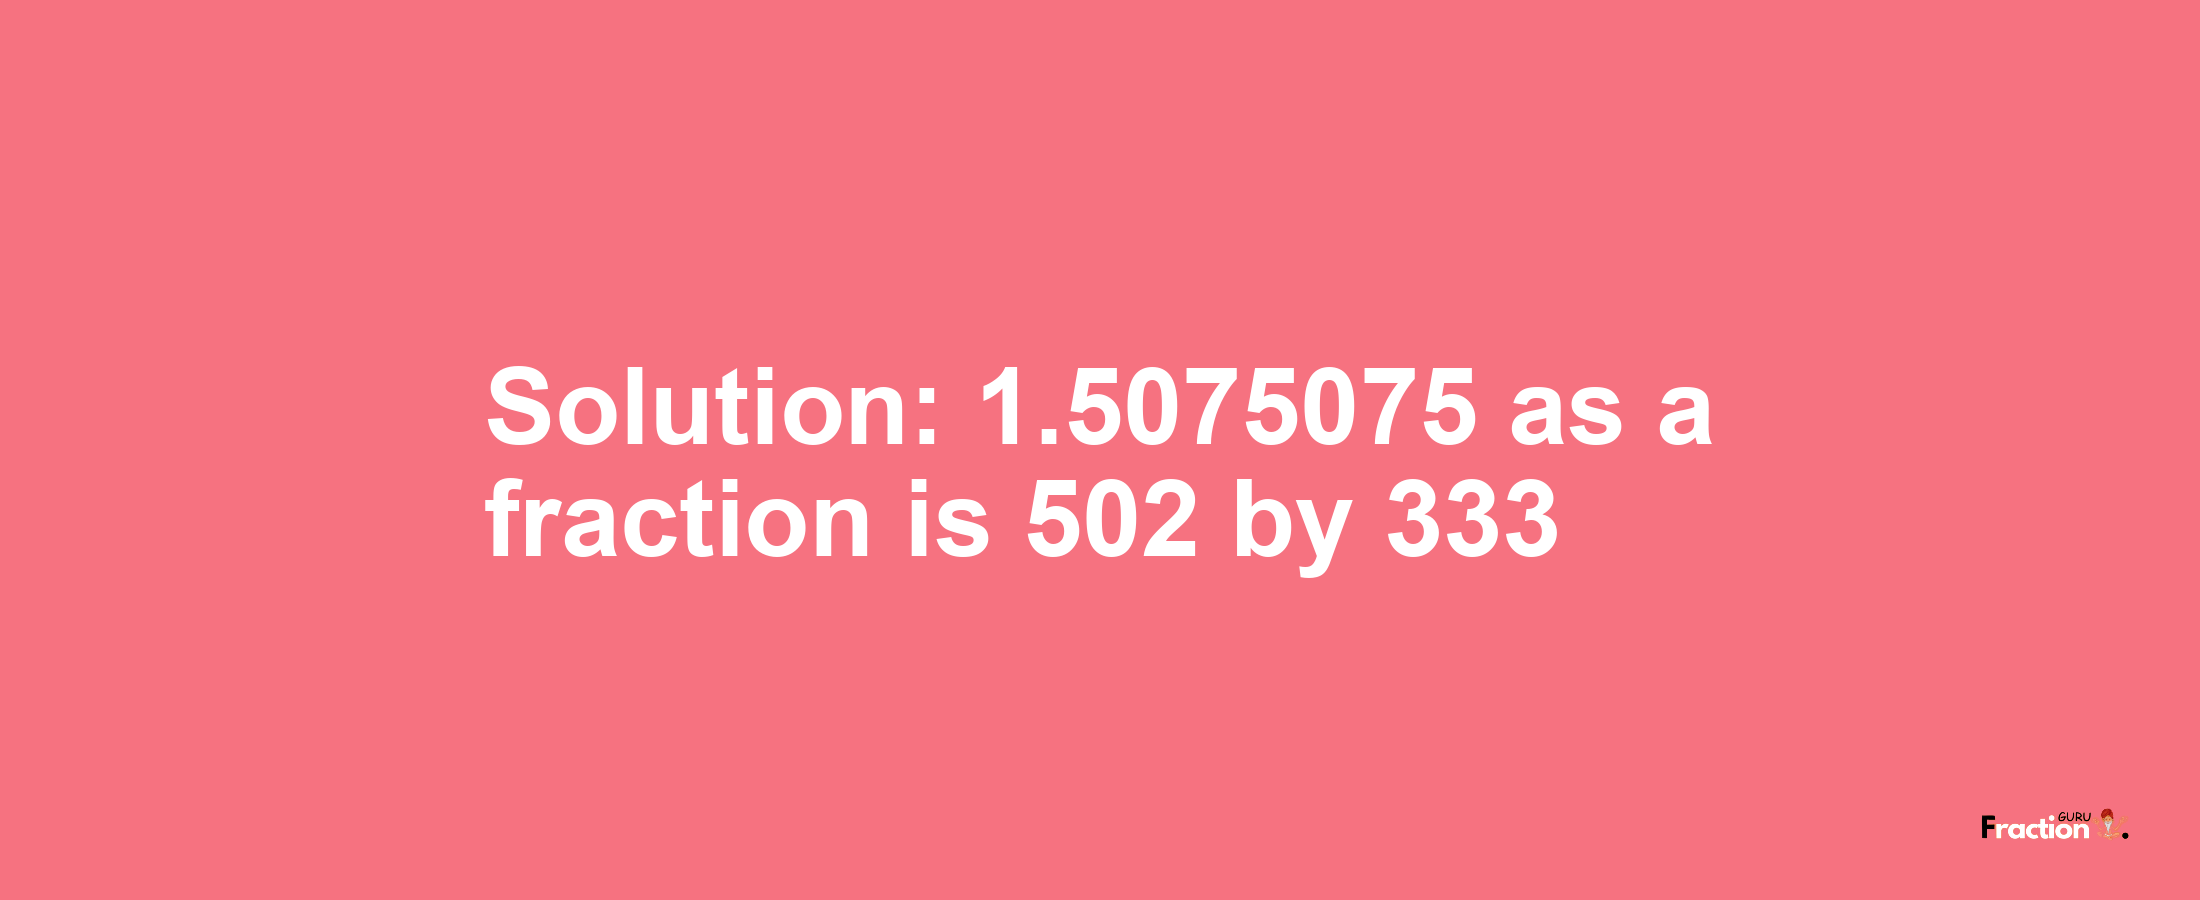 Solution:1.5075075 as a fraction is 502/333